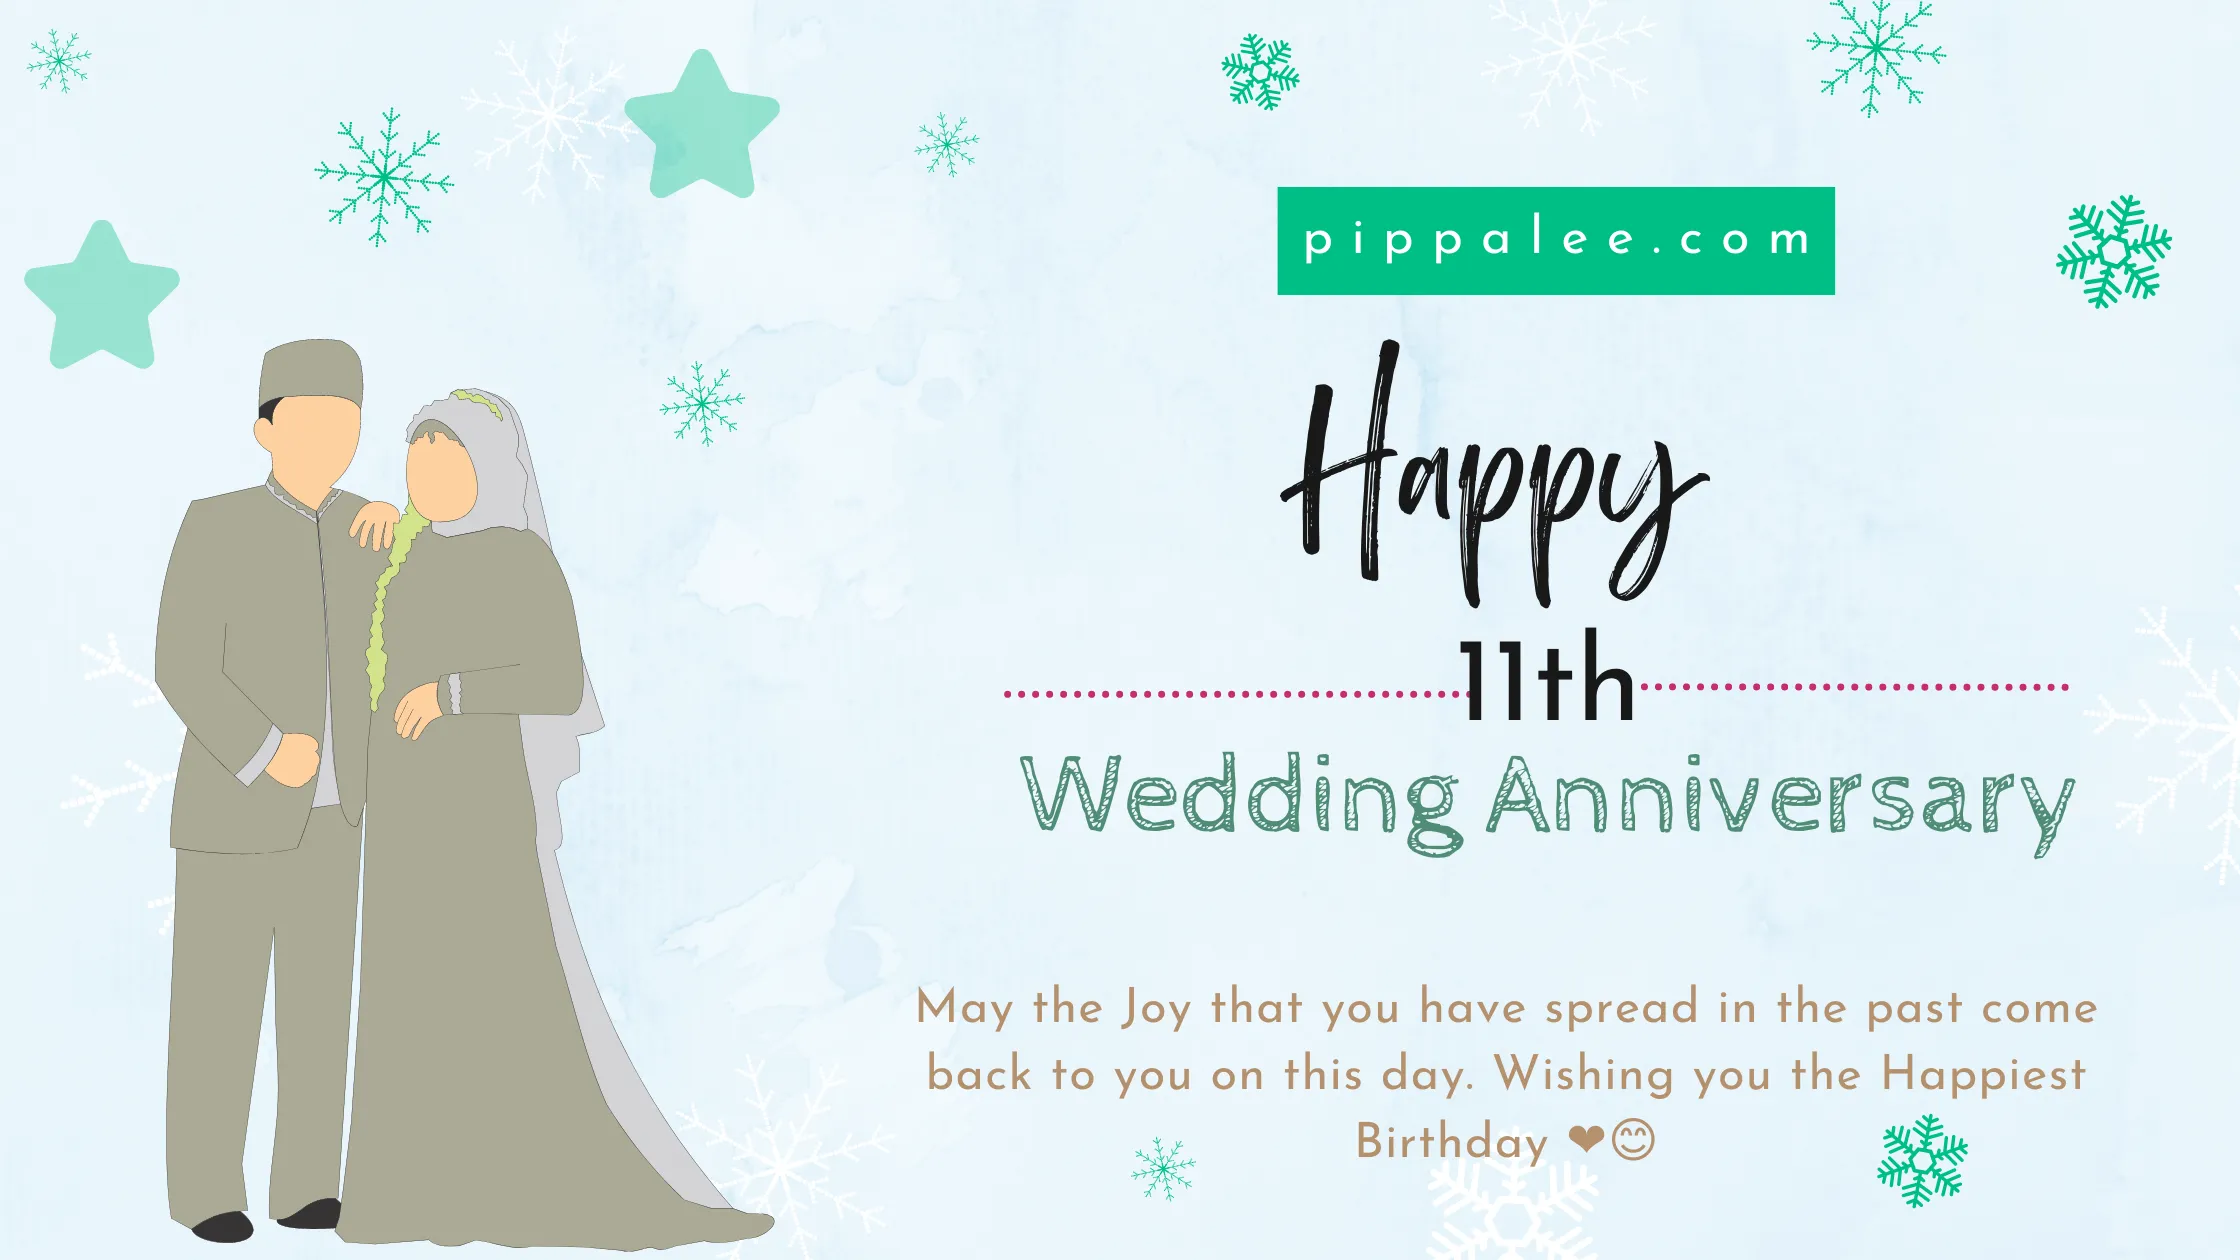 11th Wedding Anniversary - Wishes & Messages